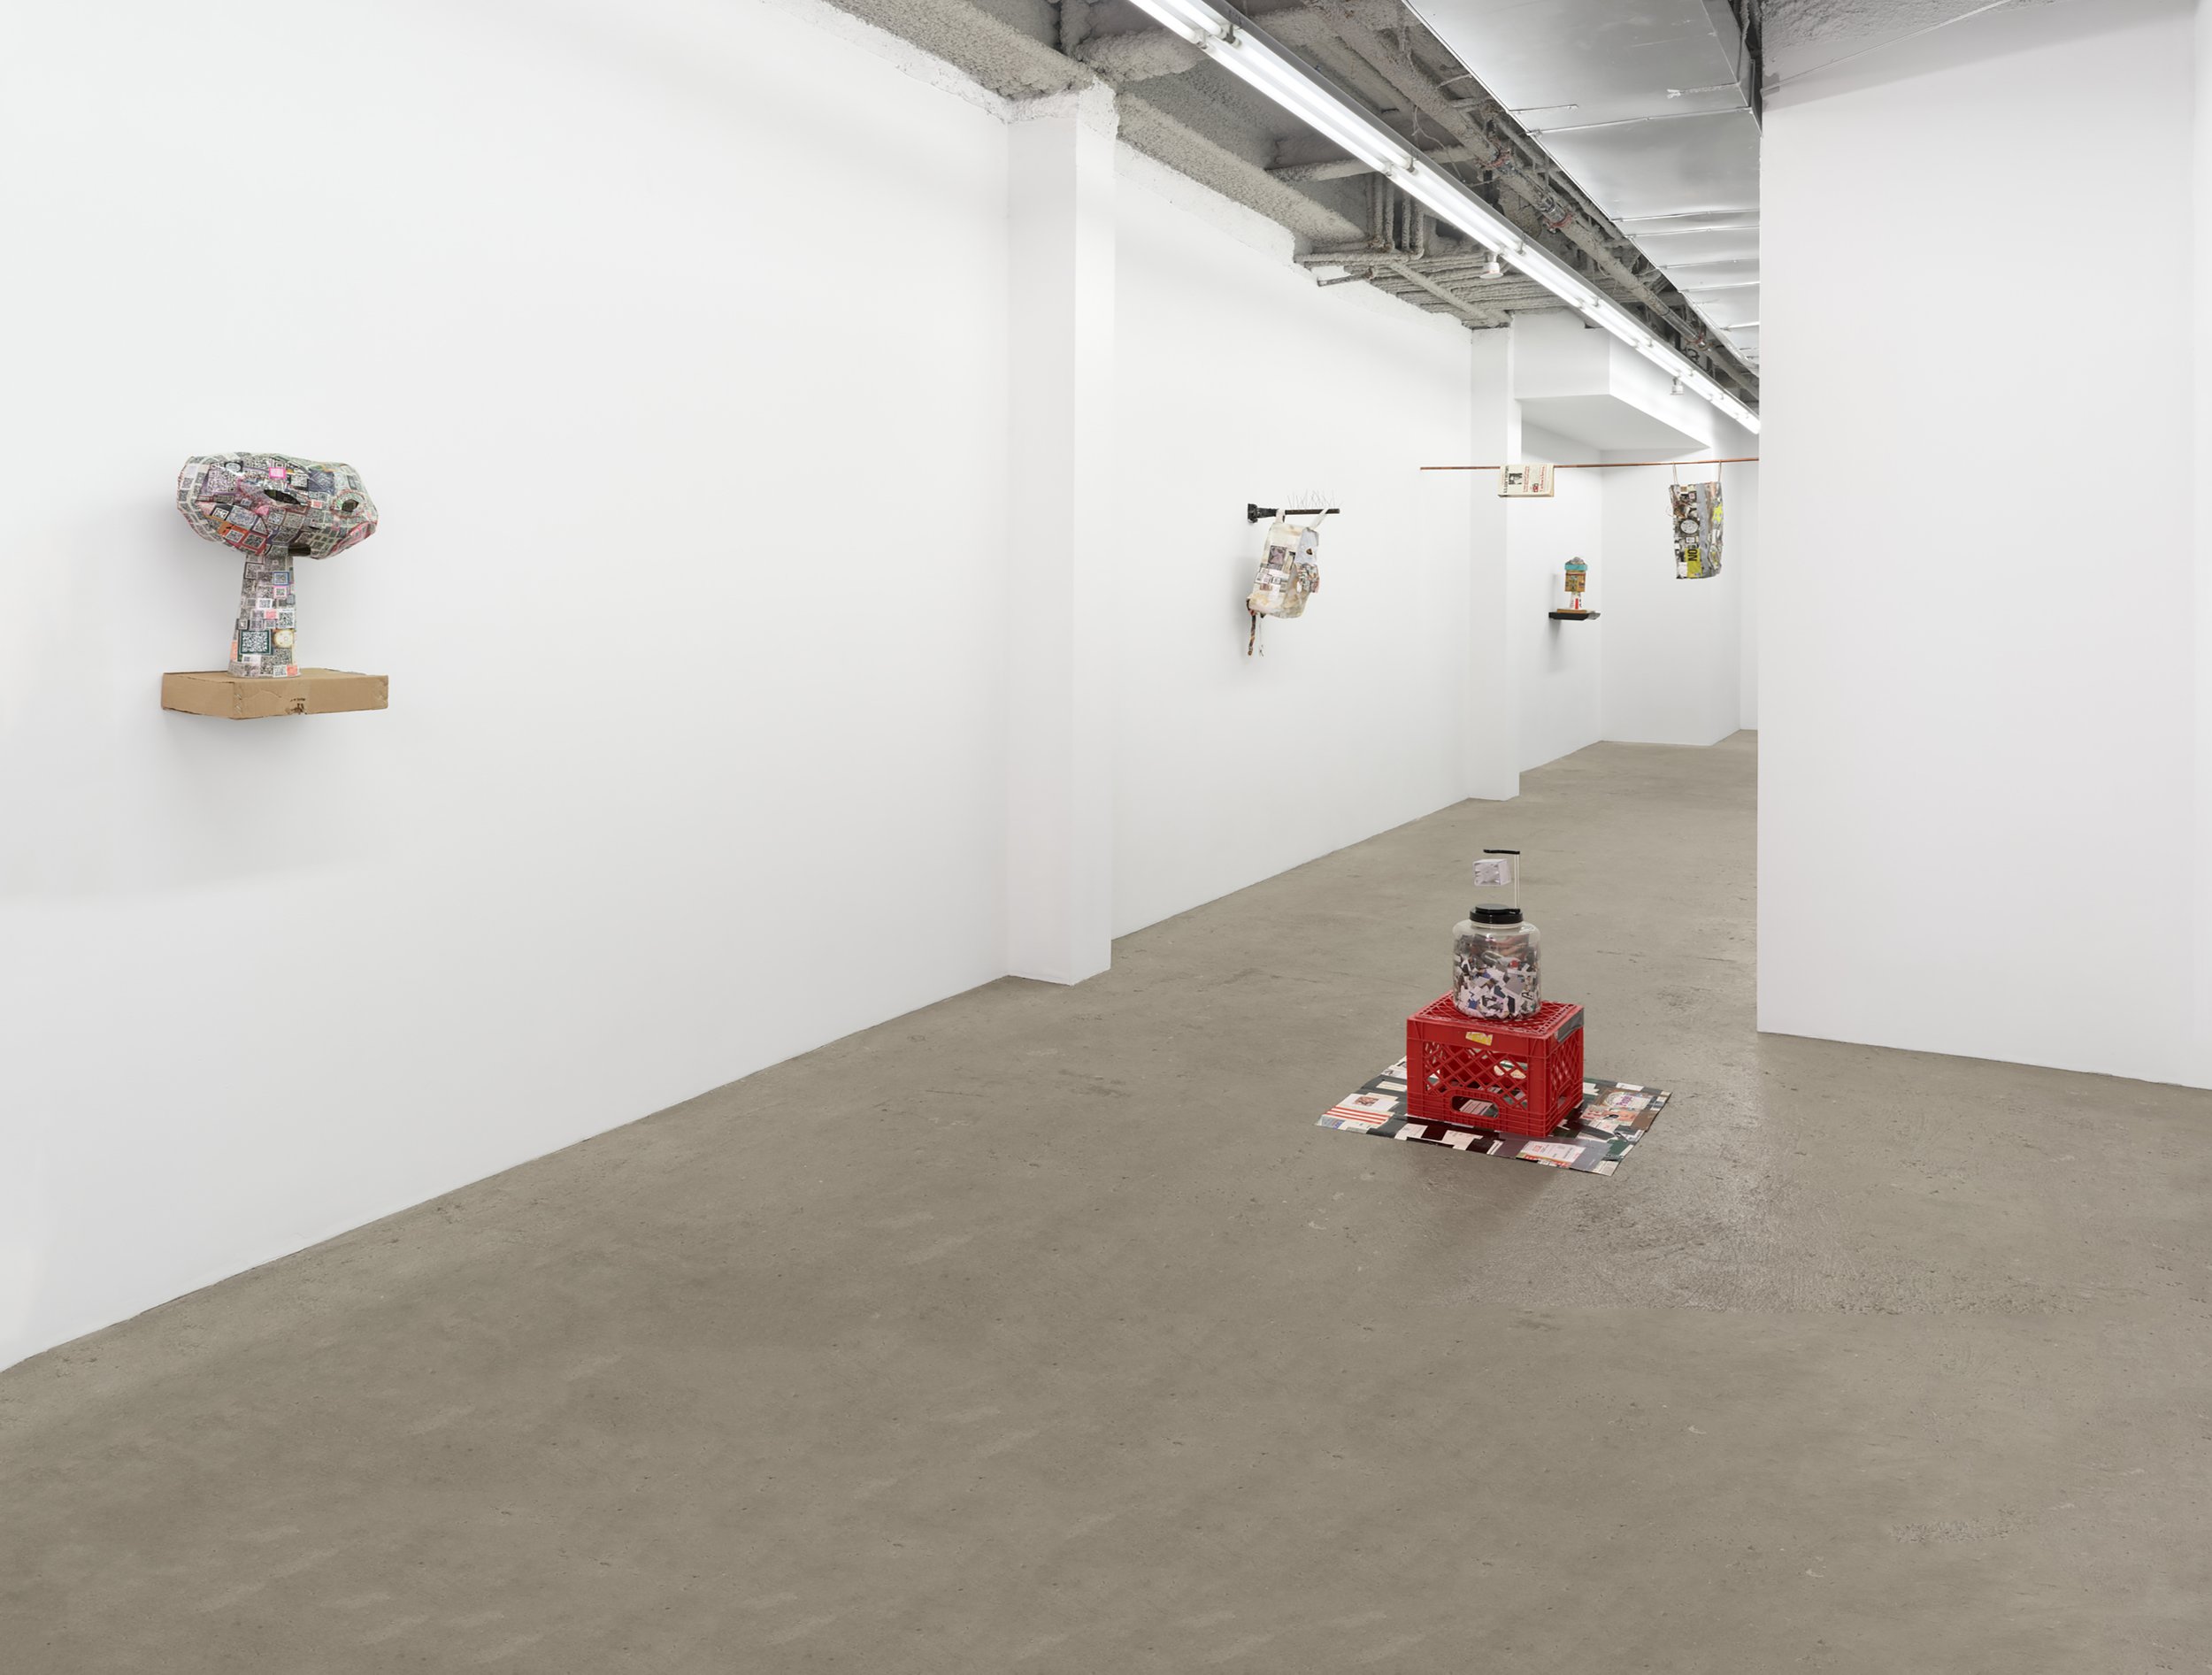  Elzie Williams III  Politics As Usual  installation view, front gallery 